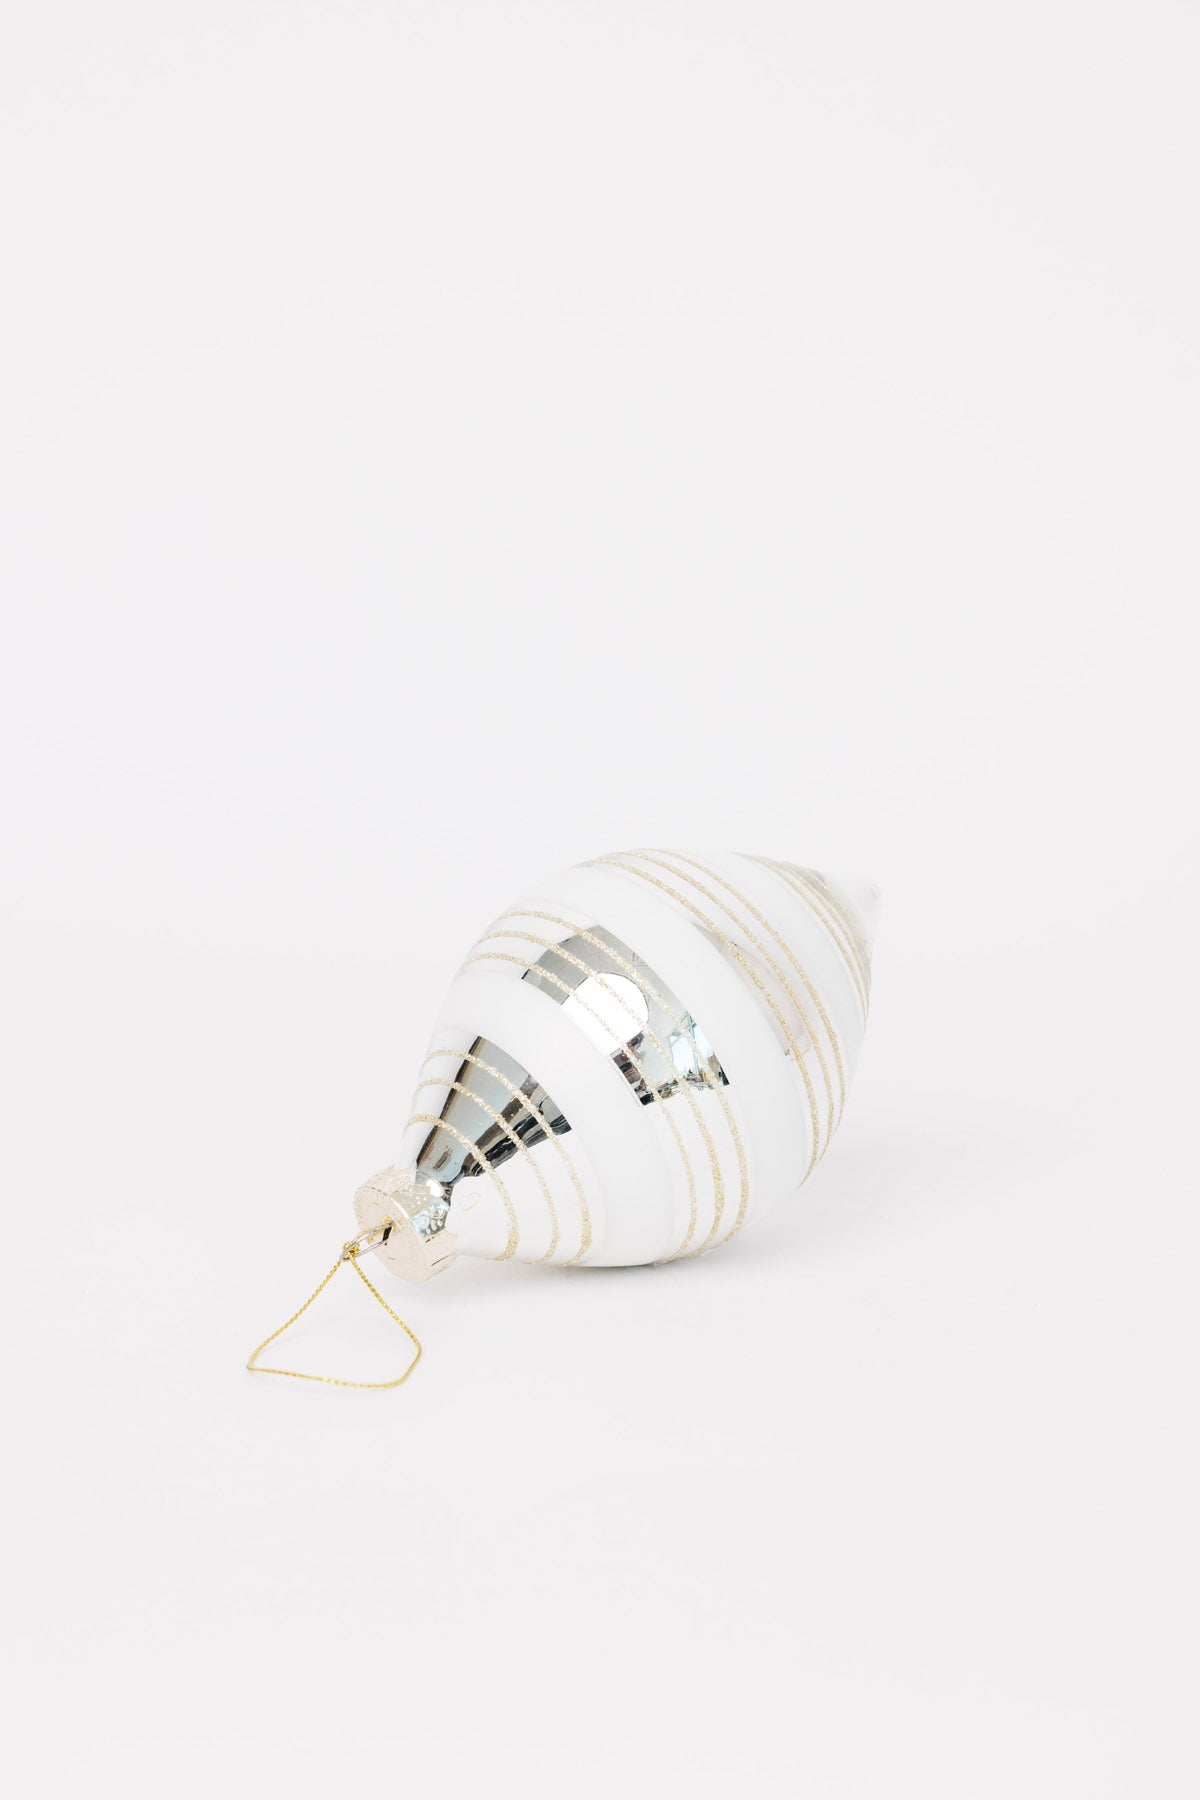 Everything Nice Striped Ornament - Finial